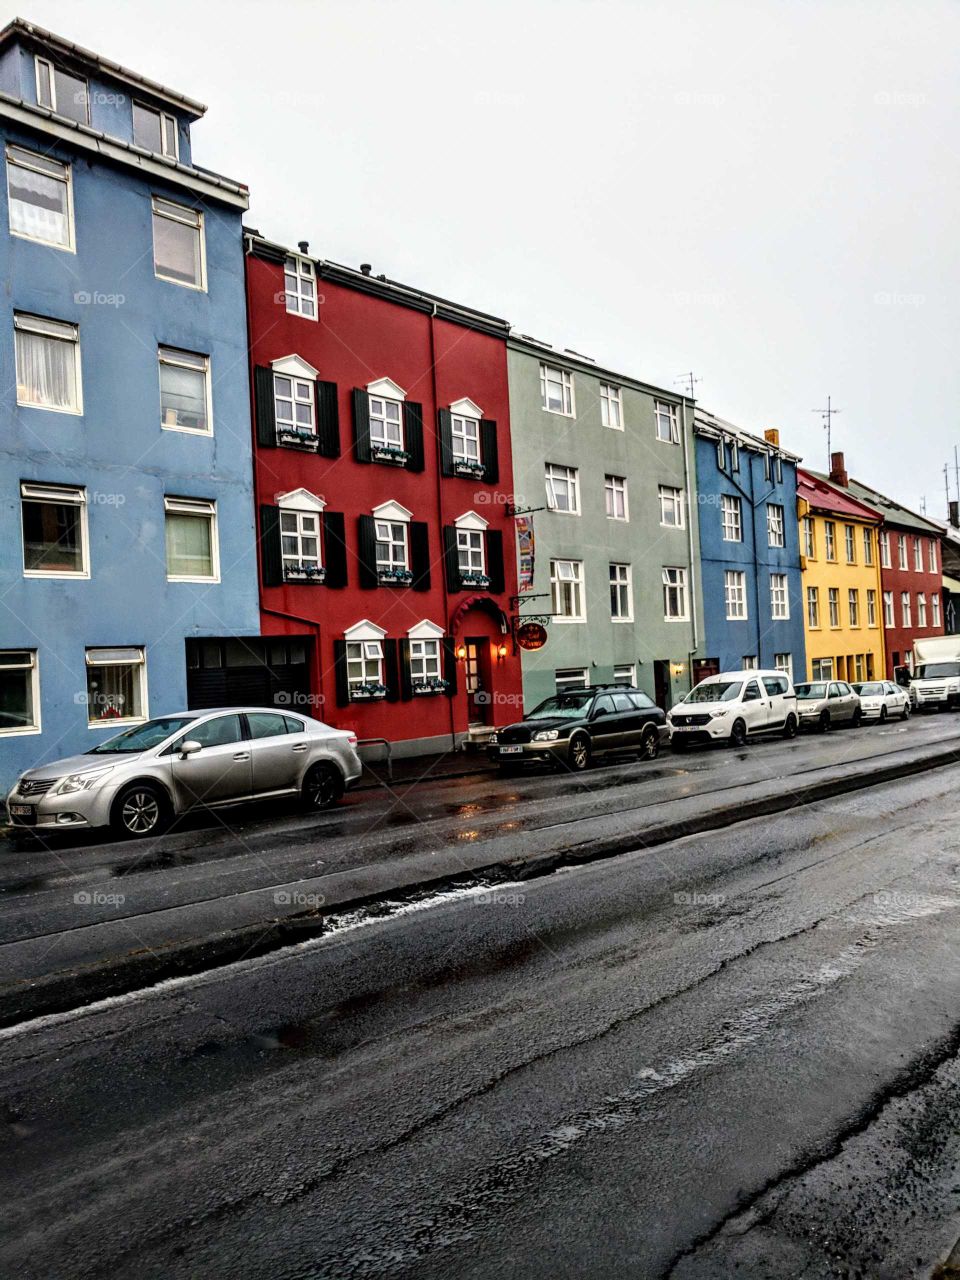 Colorful Row Of Houses On A Rainy Day